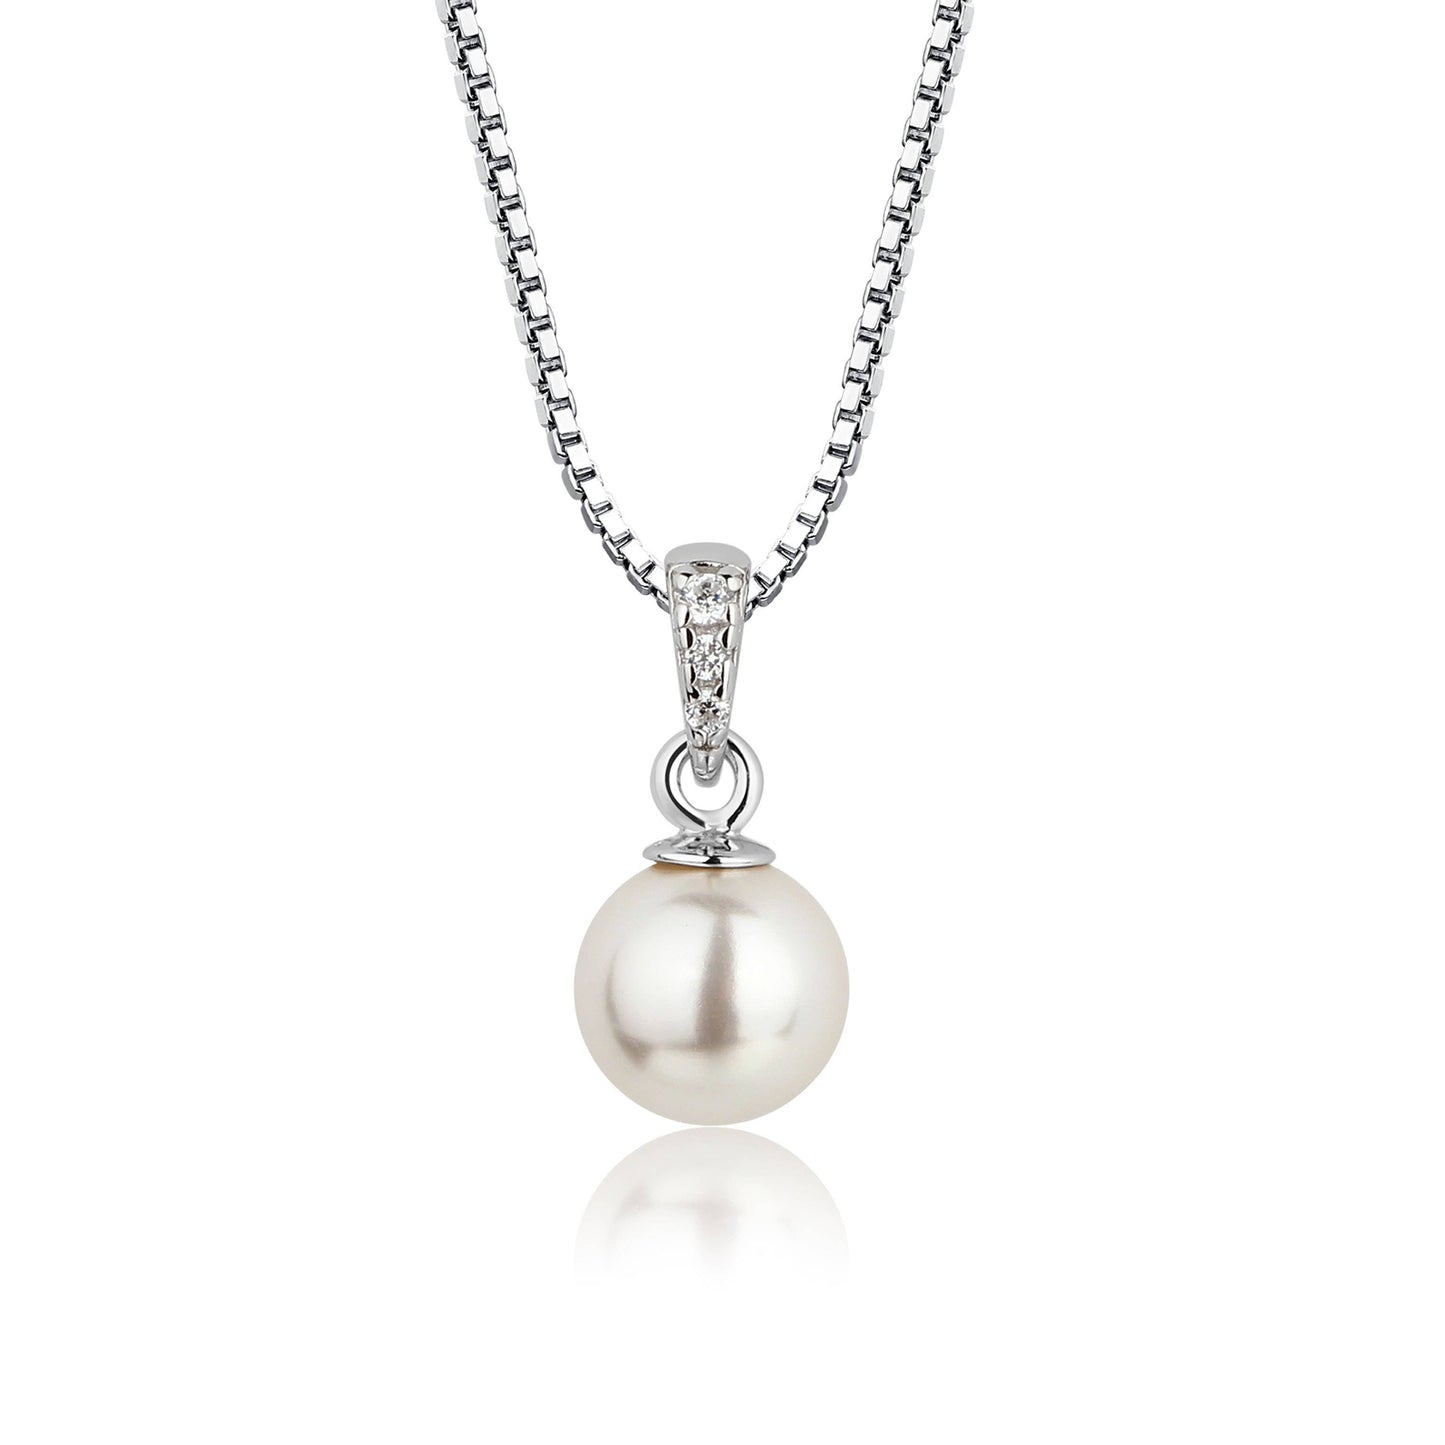 Girls Sterling Silver Girls Pearl Pendant Necklace Kids: 14 inch